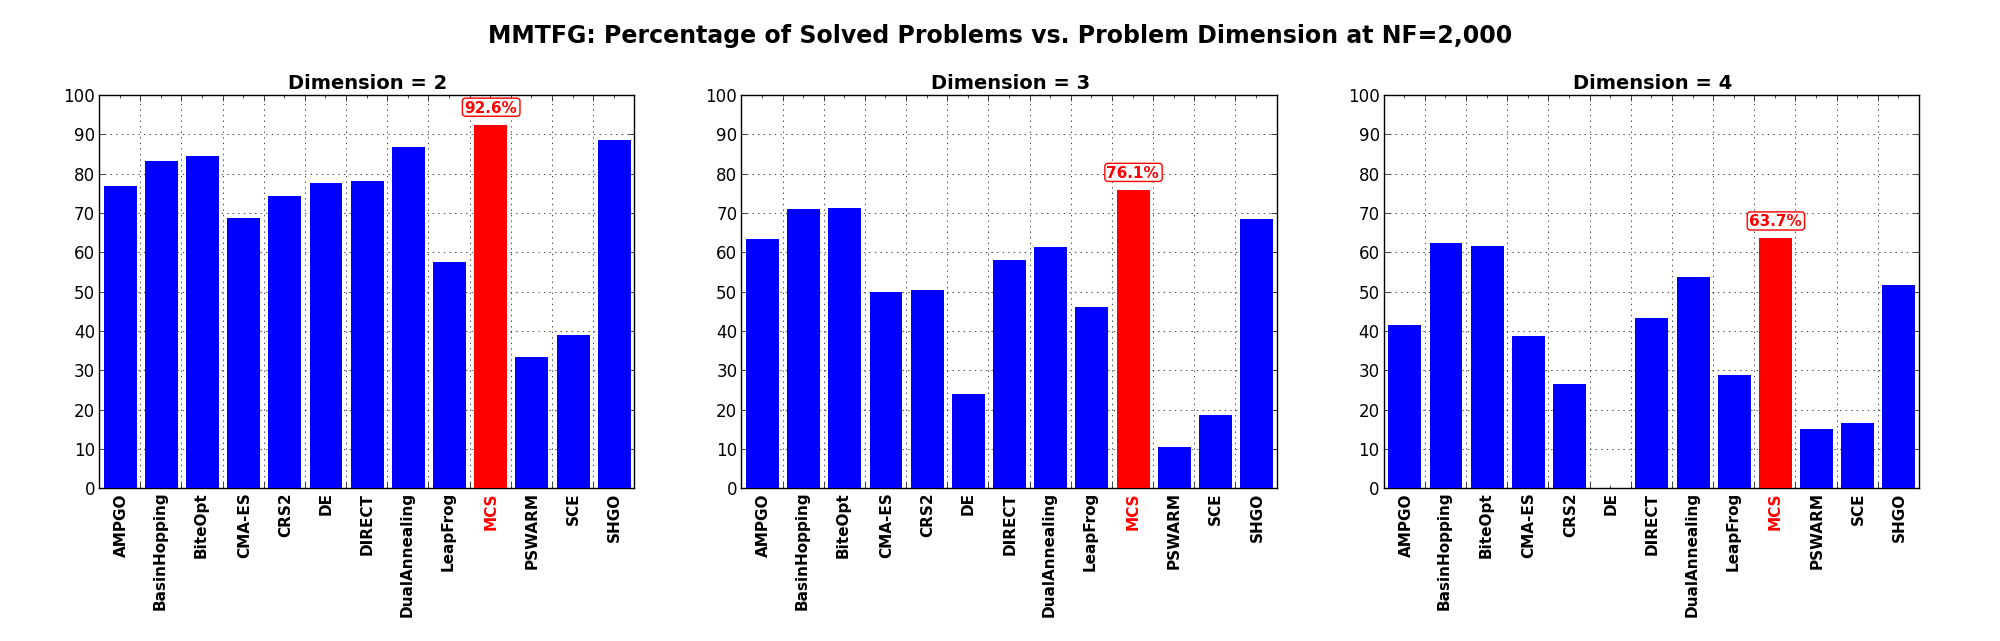 Percentage of problems solved as a function of problem dimension at :math:`NF = 2,000`